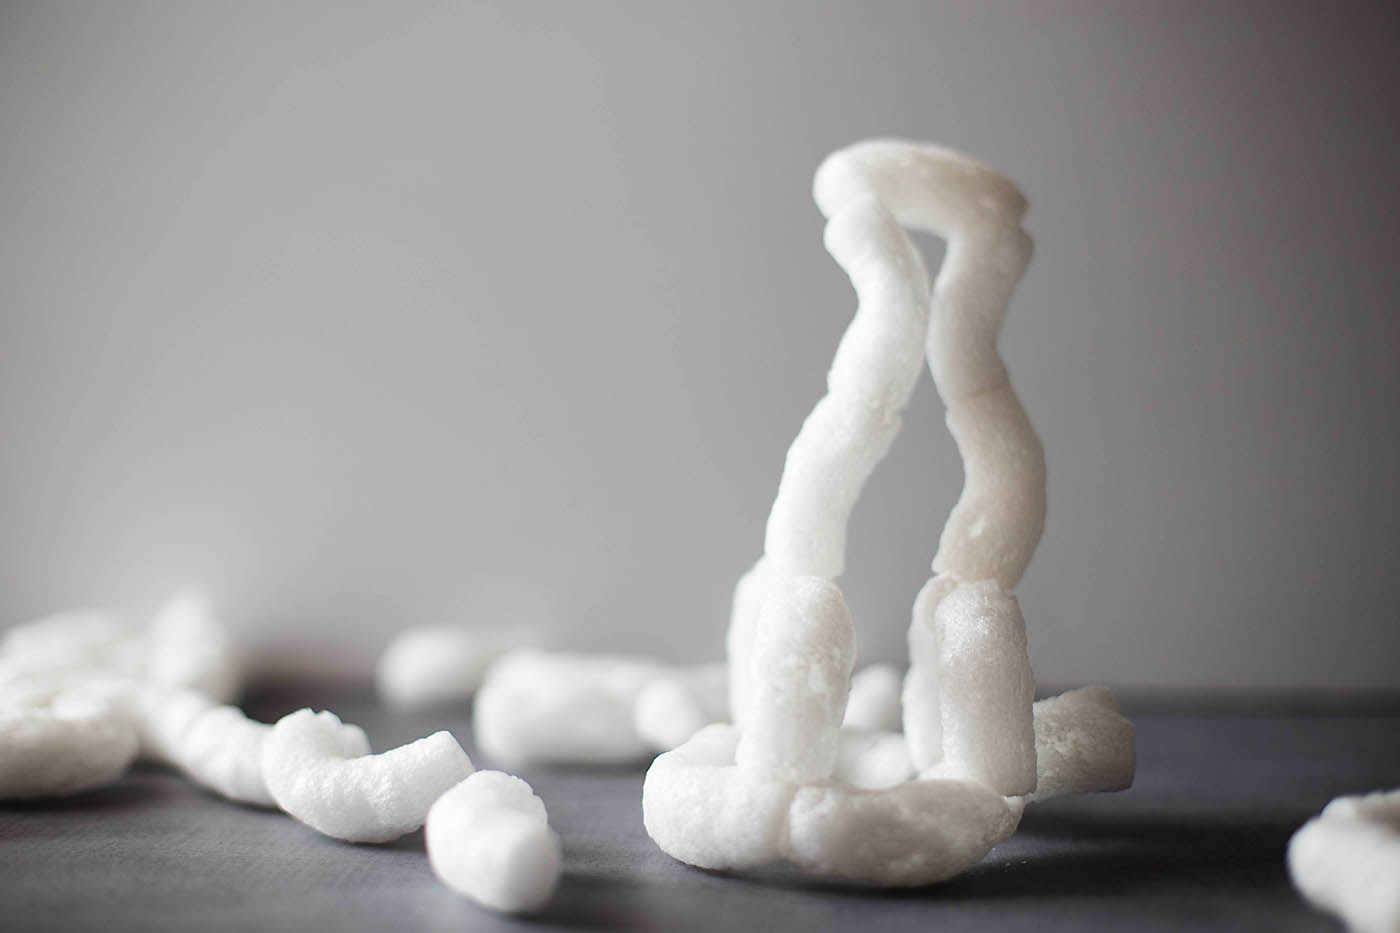 Building with biodegradable packing peanuts - great idea!